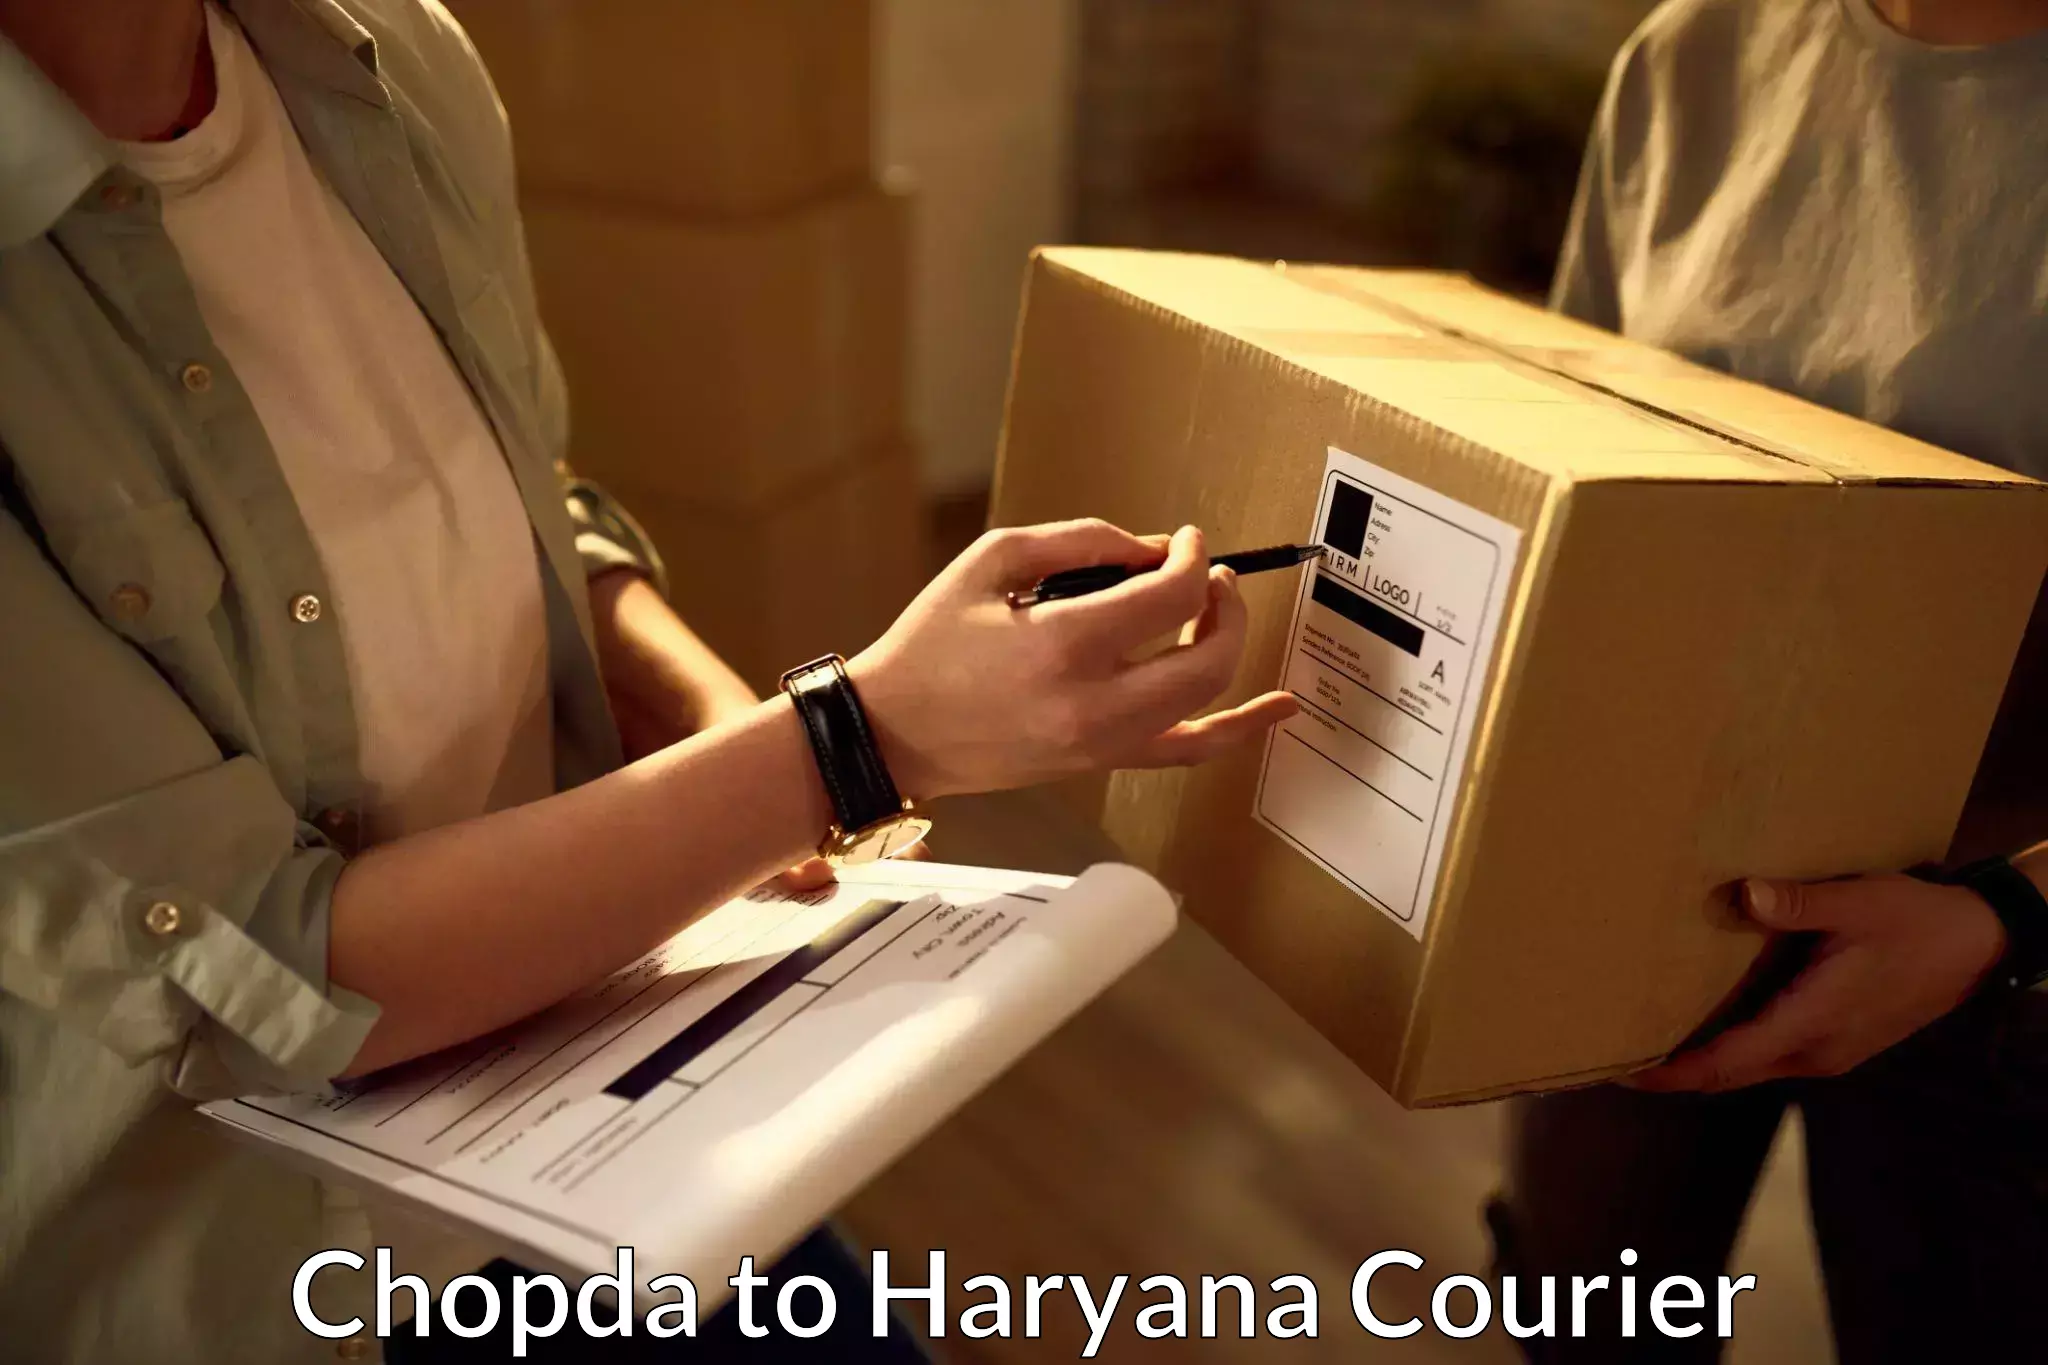 Same-day delivery solutions Chopda to Haryana